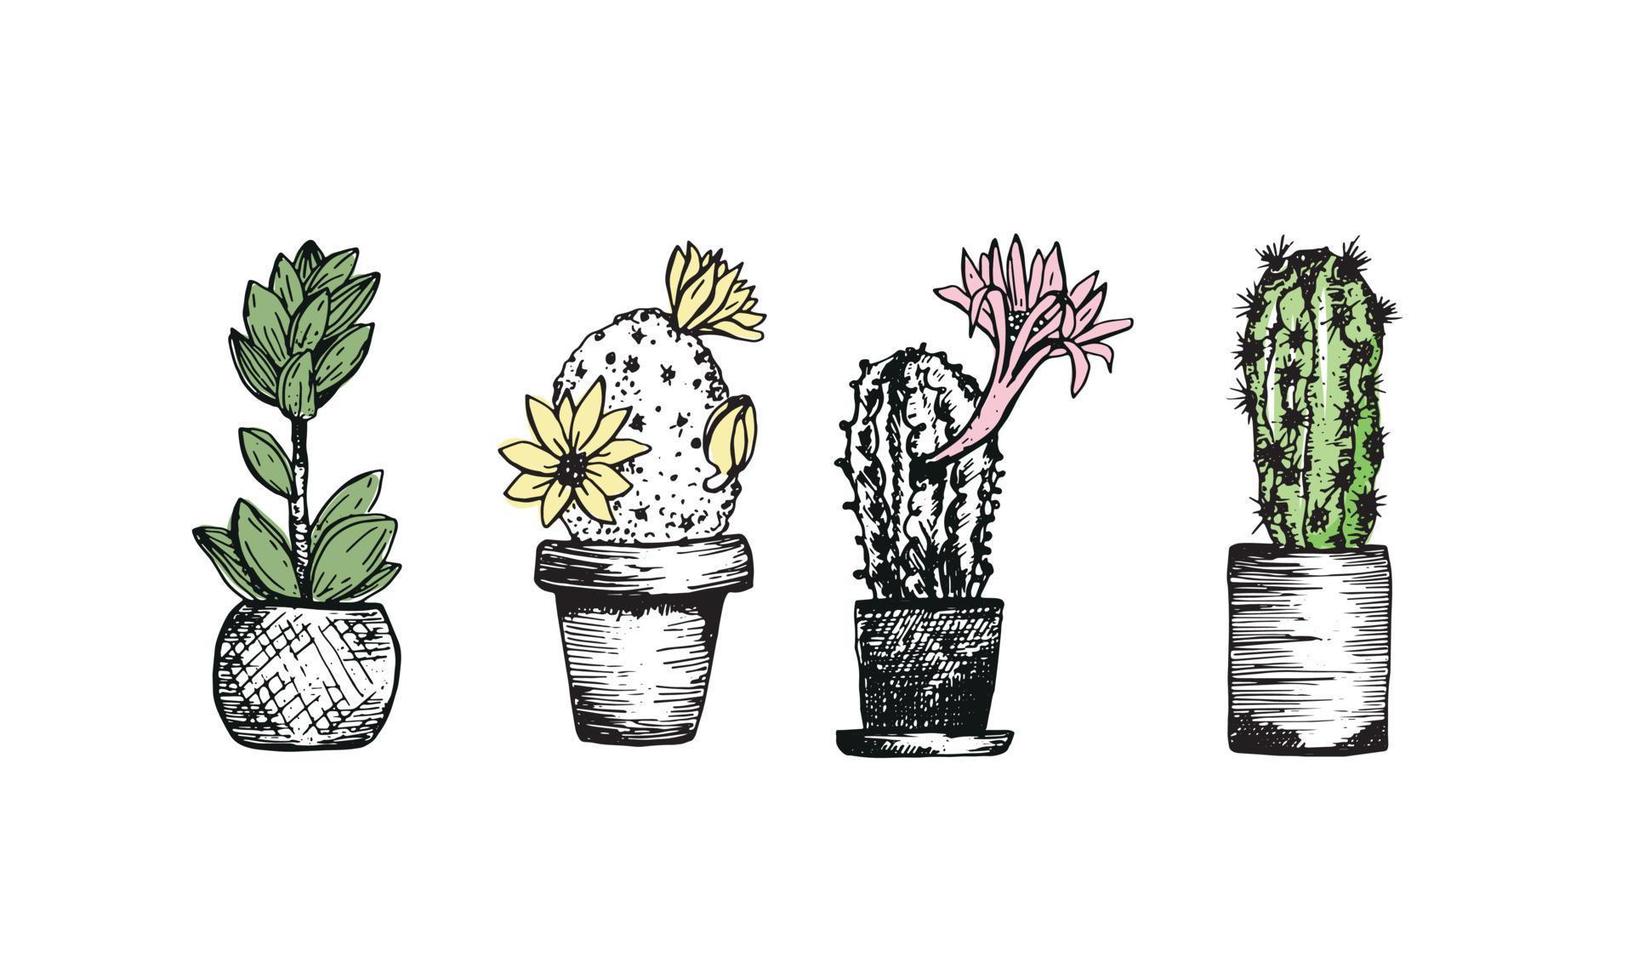 Cactus sketch set. House plants in pots. Hobby at home. Botany  decoration for interior. Vector illustration  on white background